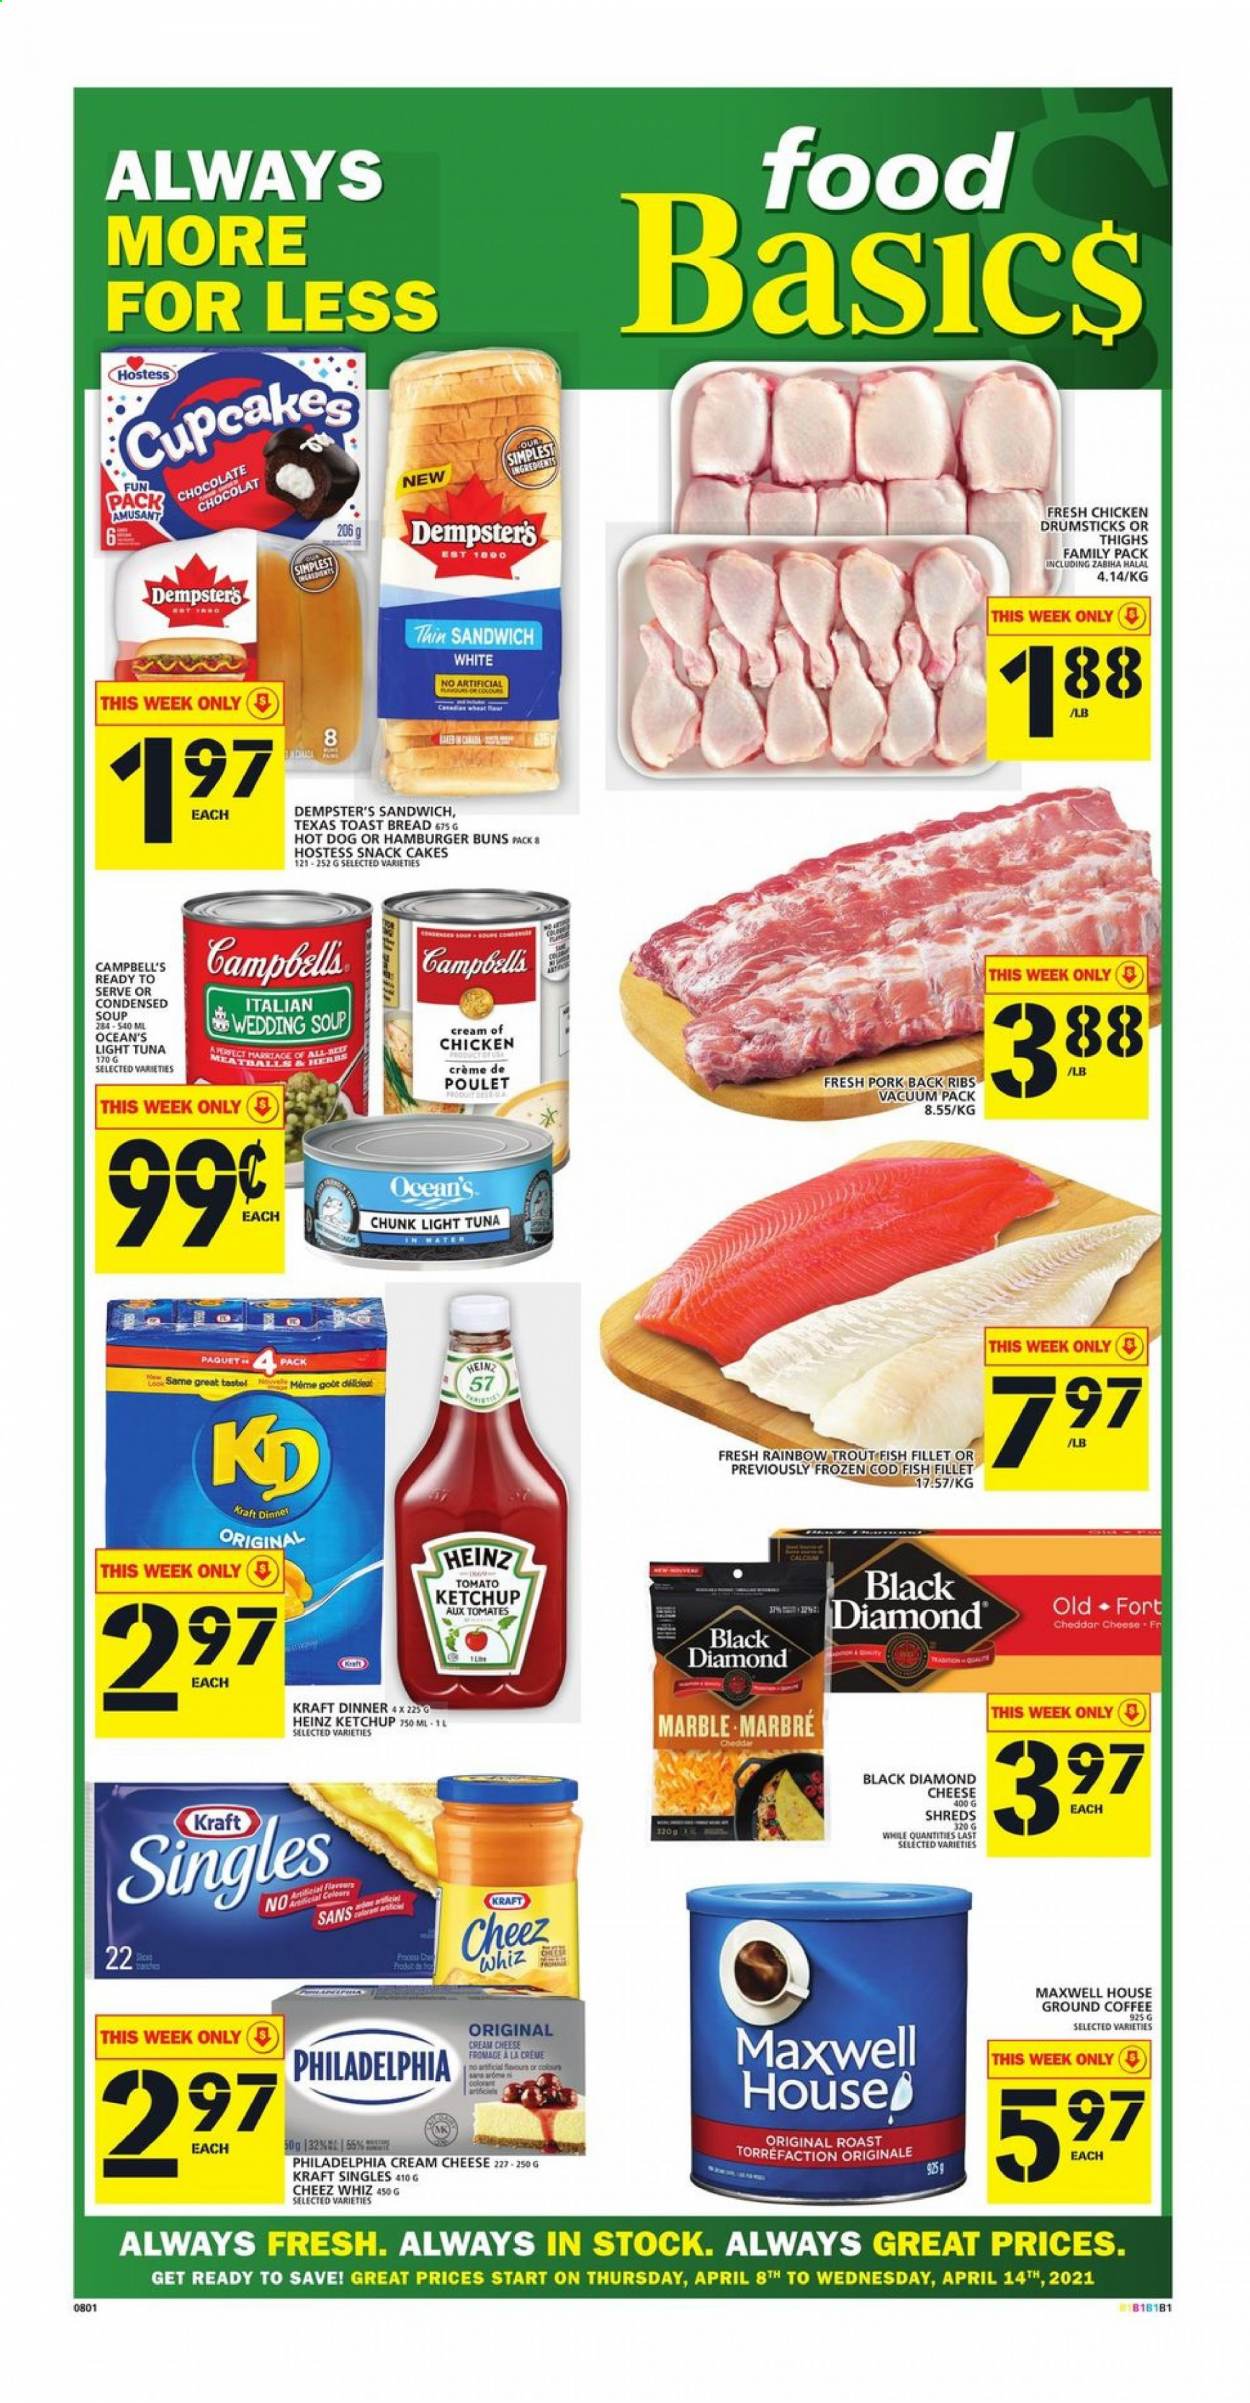 thumbnail - Food Basics Flyer - April 08, 2021 - April 14, 2021 - Sales products - hot dog rolls, buns, burger buns, toast bread, cupcake, cod, fish fillets, trout, tuna, fish, Campbell's, sandwich, condensed soup, Kraft®, ready meal, cheese spread, cream cheese, sandwich slices, cheddar, cheese, Kraft Singles, chocolate, snack cake, canned tuna, light tuna, canned fish, ketchup, Maxwell House, coffee, ground coffee, chicken thighs, chicken drumsticks, chicken, ribs, pork meat, pork ribs, pork back ribs, Heinz, Philadelphia. Page 1.